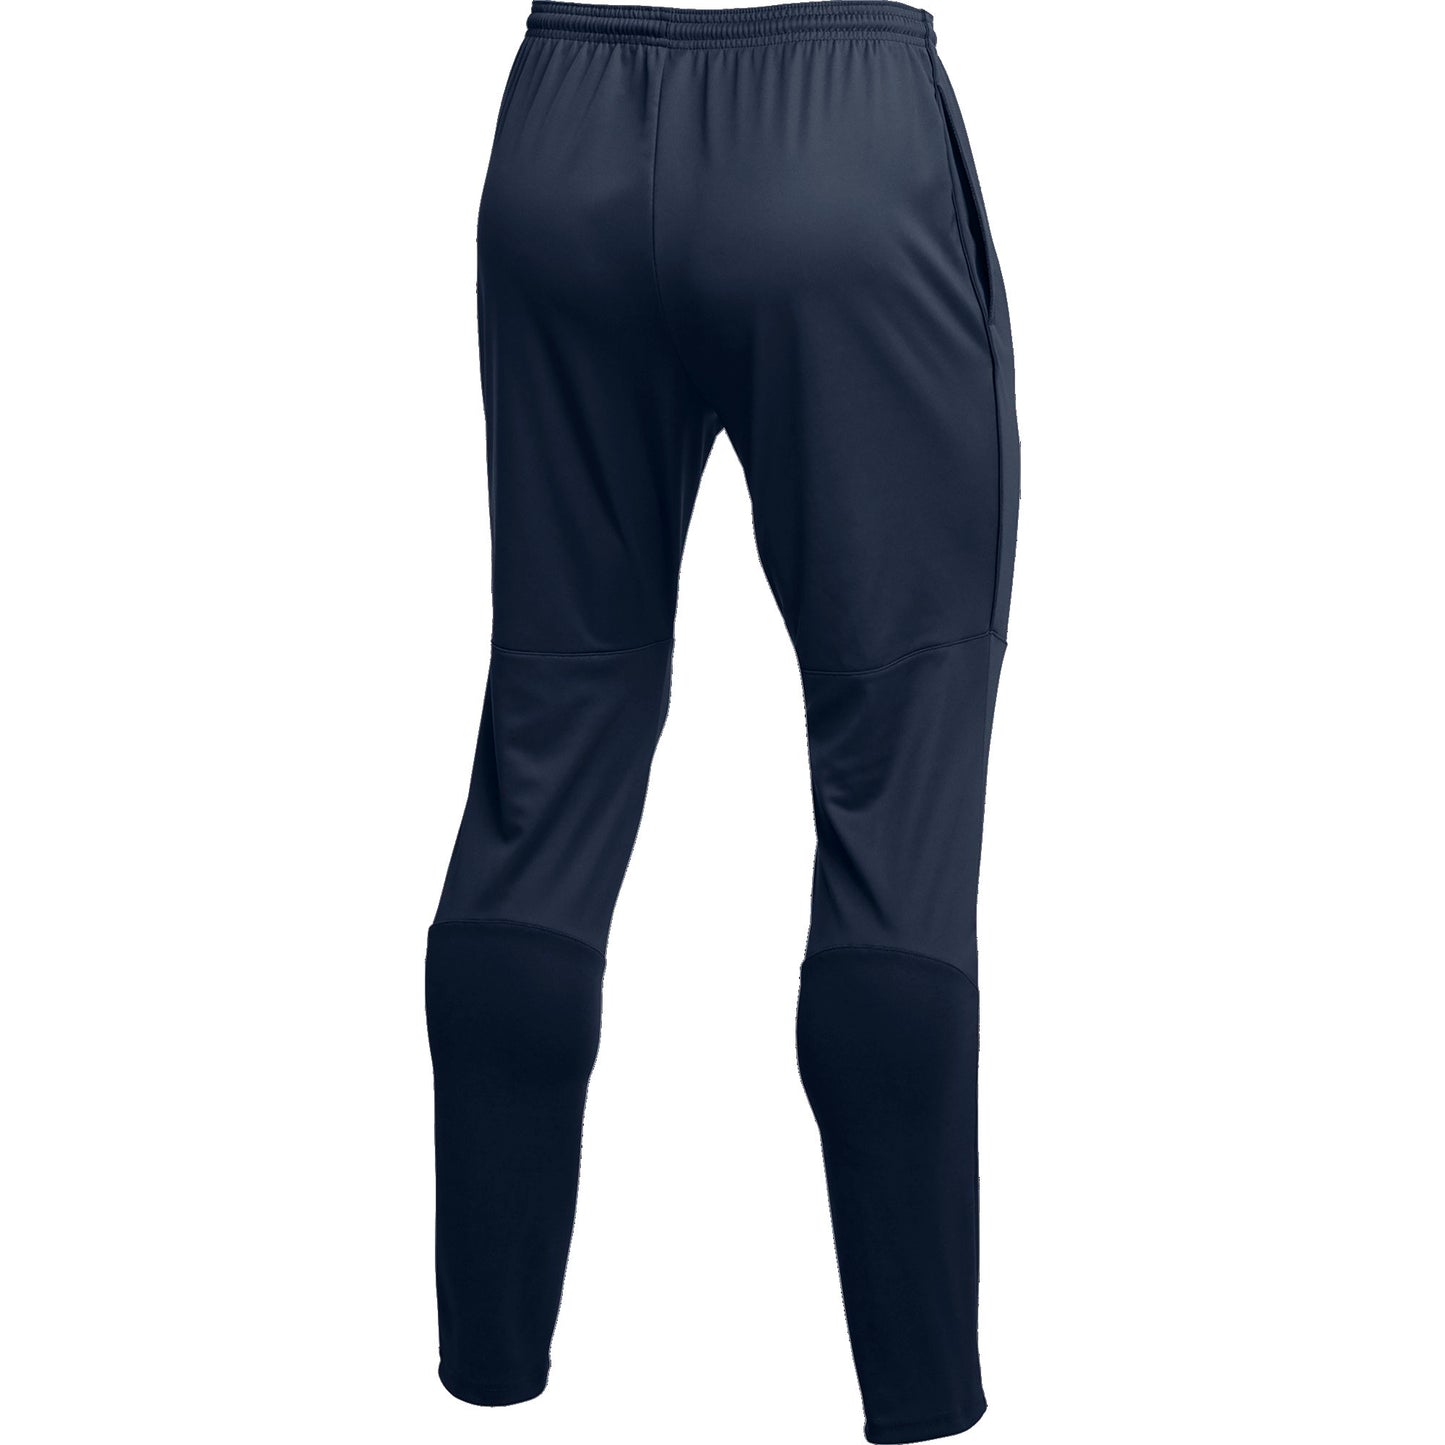 NIKE PARK 20 PANT - YOUTH'S